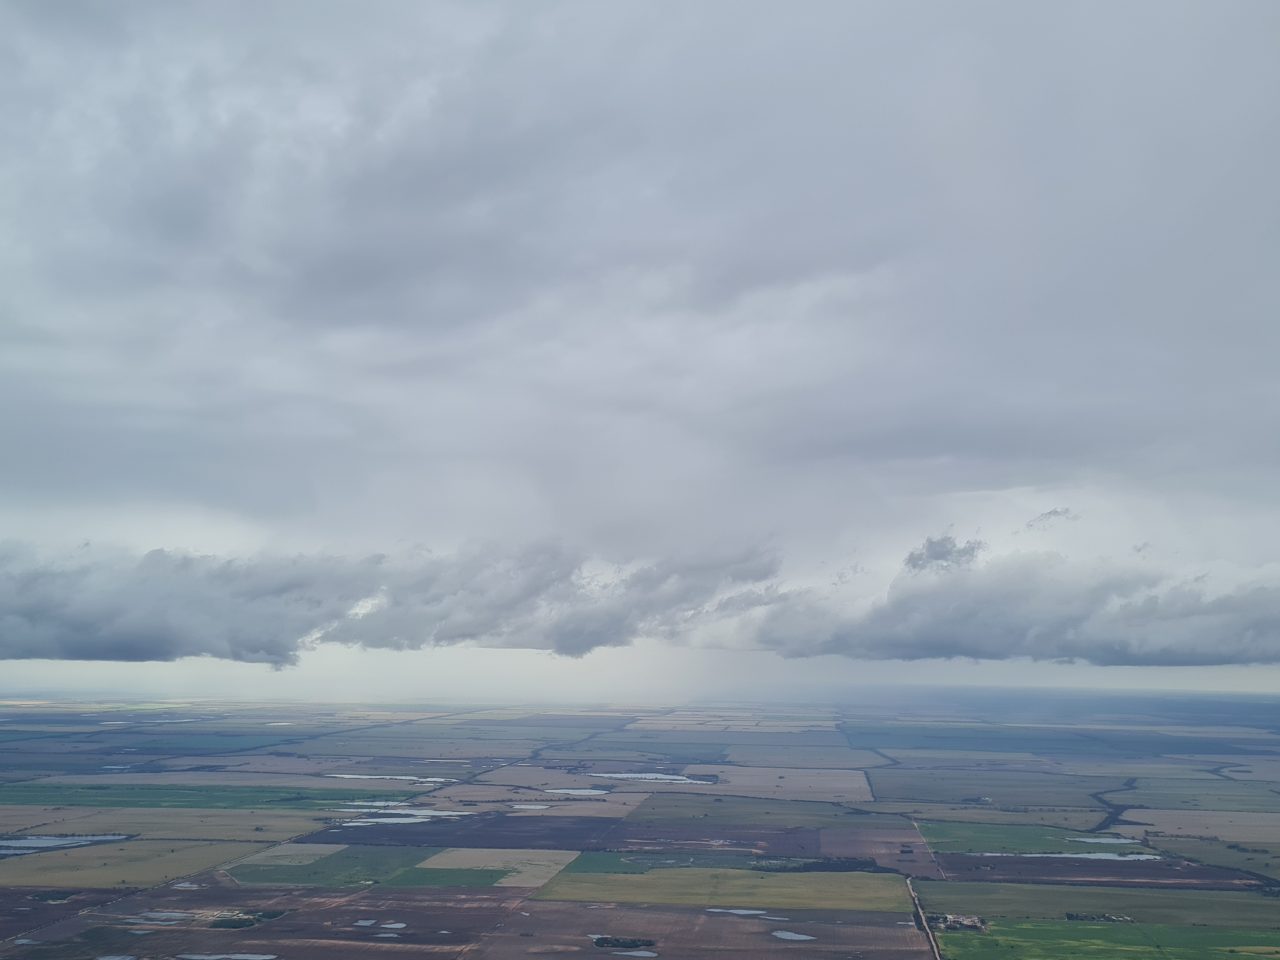 Aerial photo of grey cloud covered sky with a front of thick lower clouds in front of rain storms sitting on the horizon.  A patchwork of farm paddocks covers the  flat landscape with several smaller wetlands pooling in lower sections.